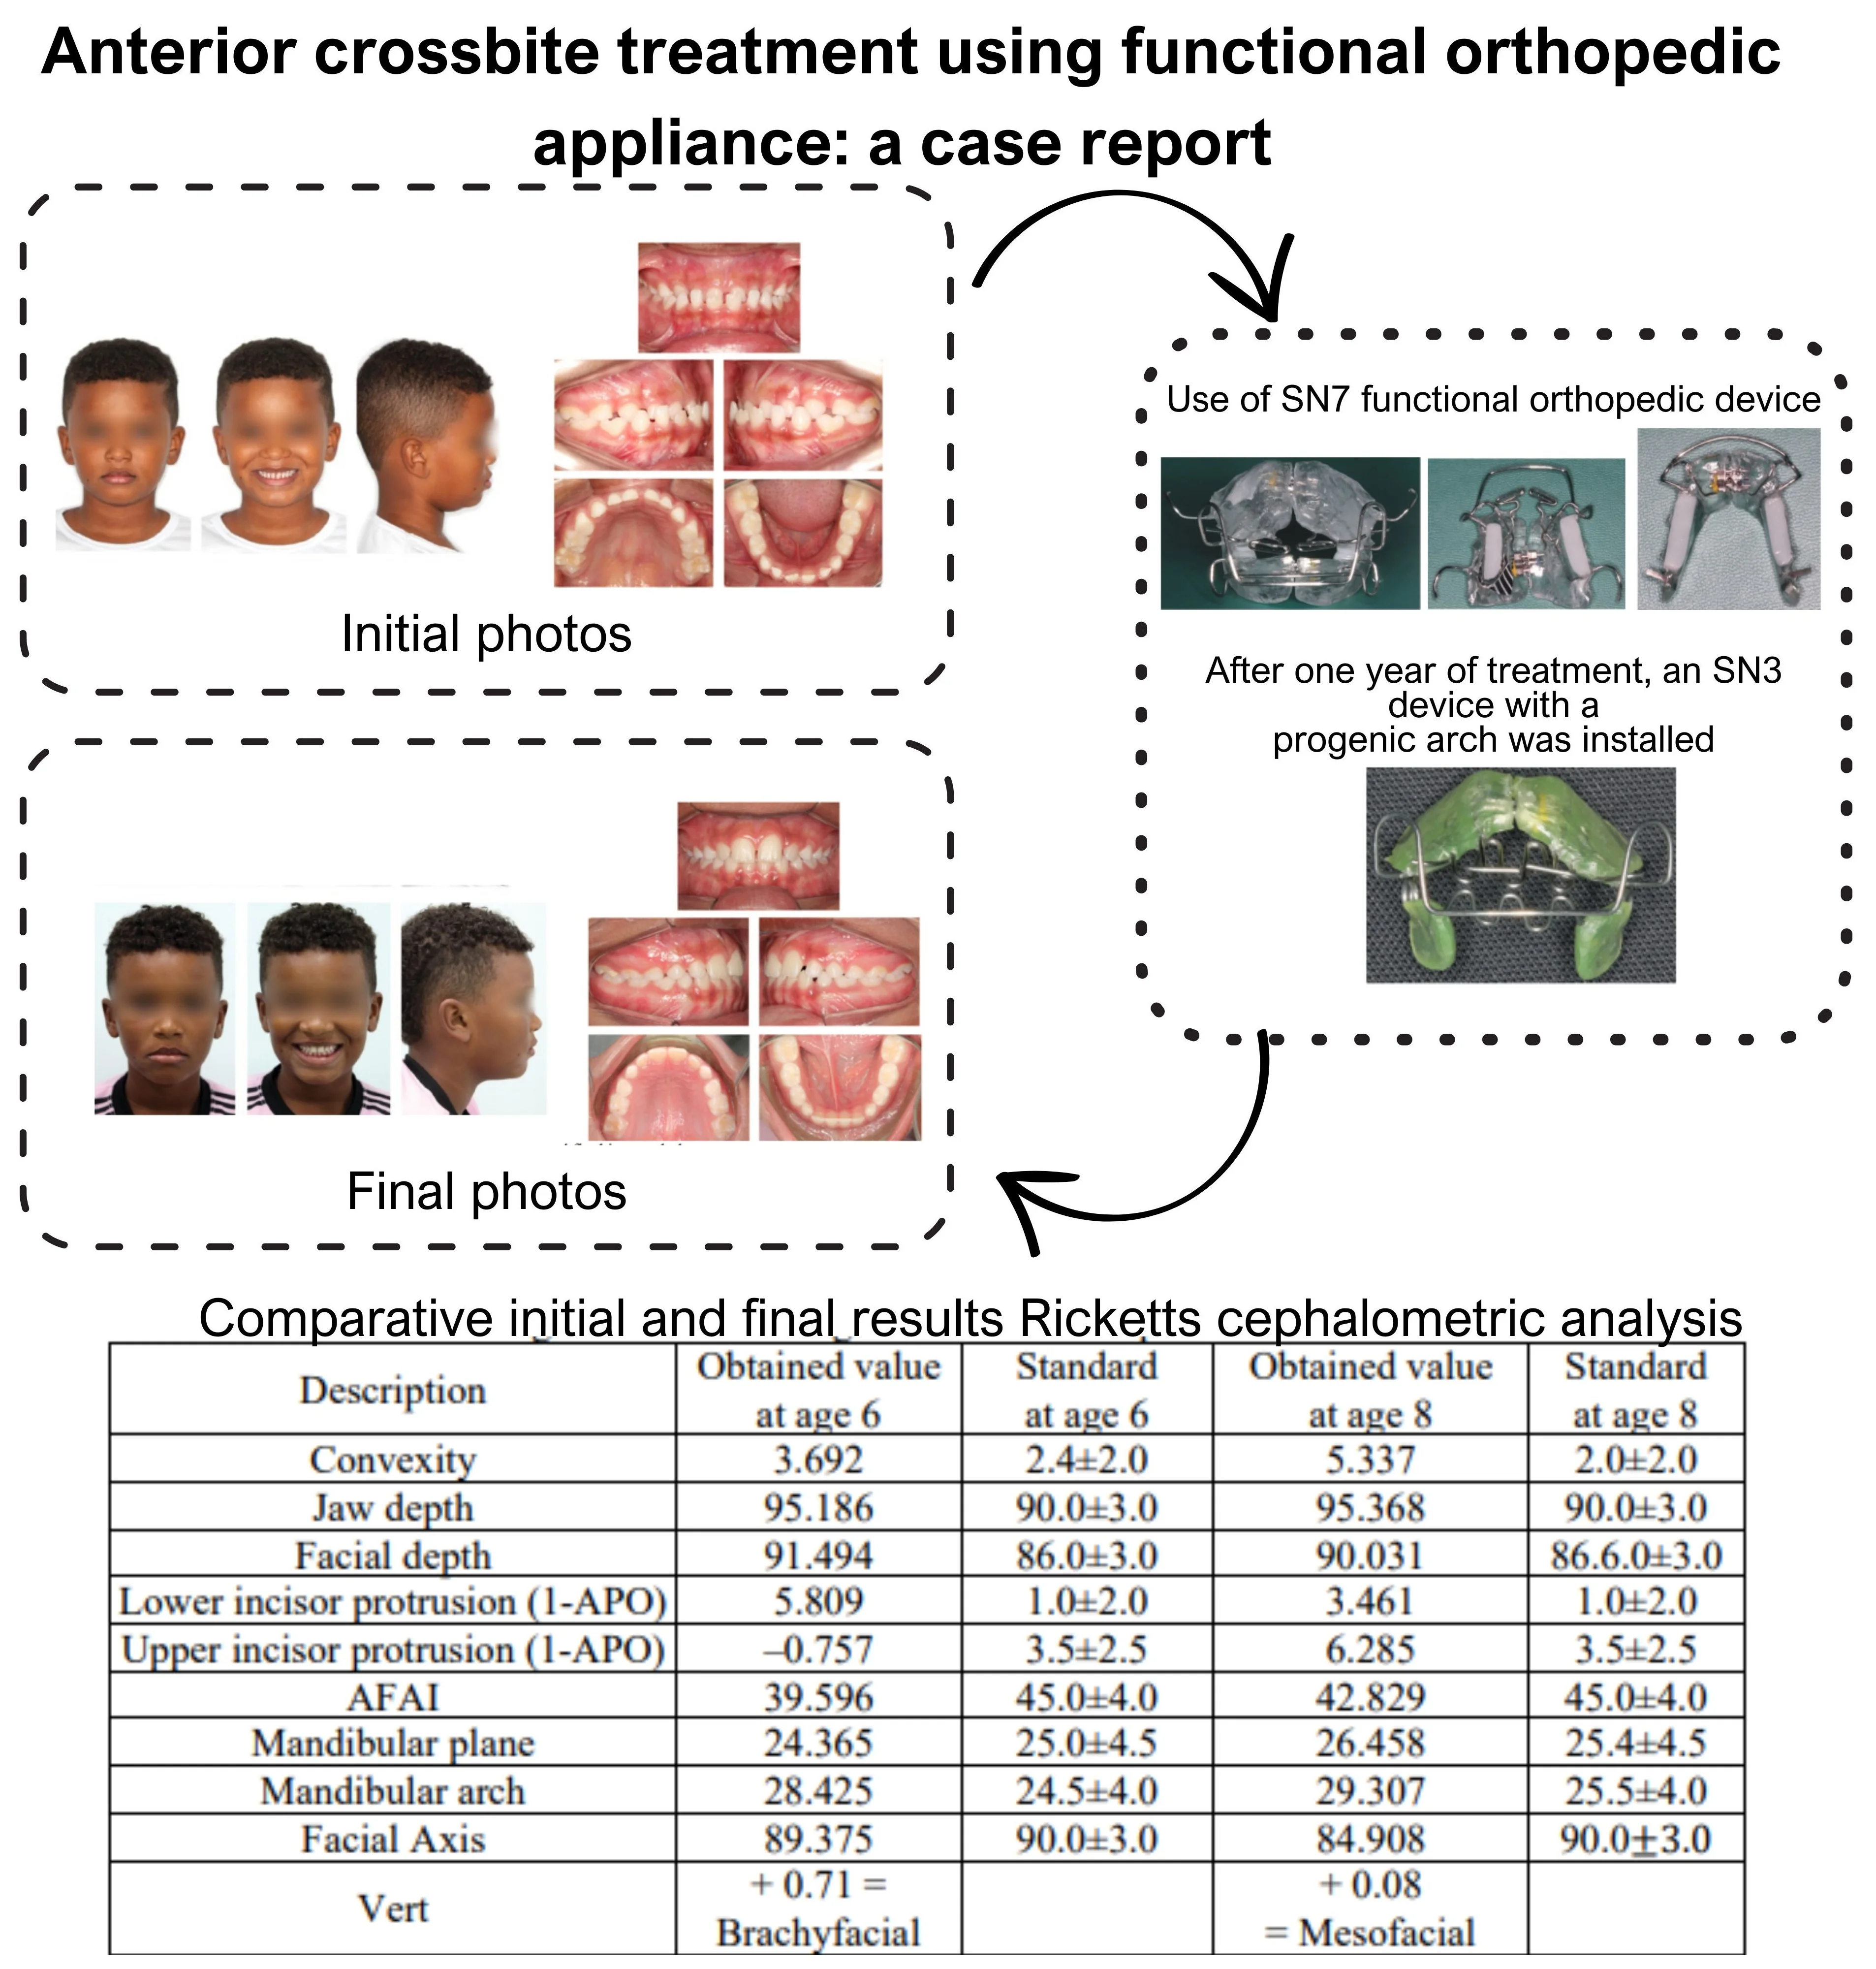 Anterior crossbite treatment using functional orthopedic appliance: a case report